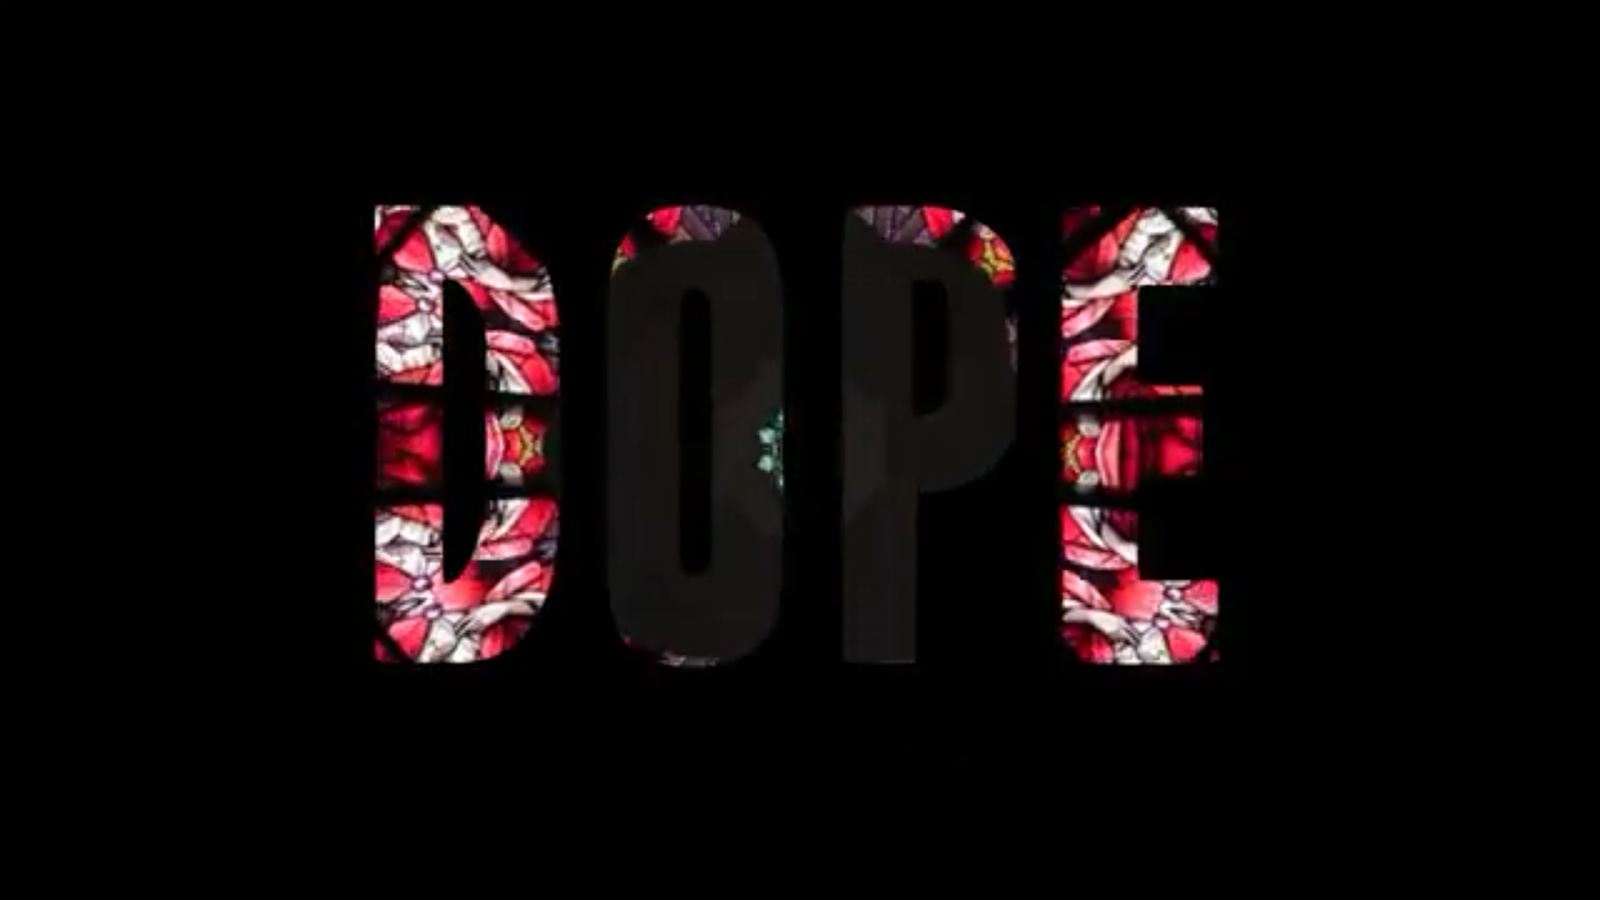 Dope Wallpaper Hd The video for dope was 1600x900